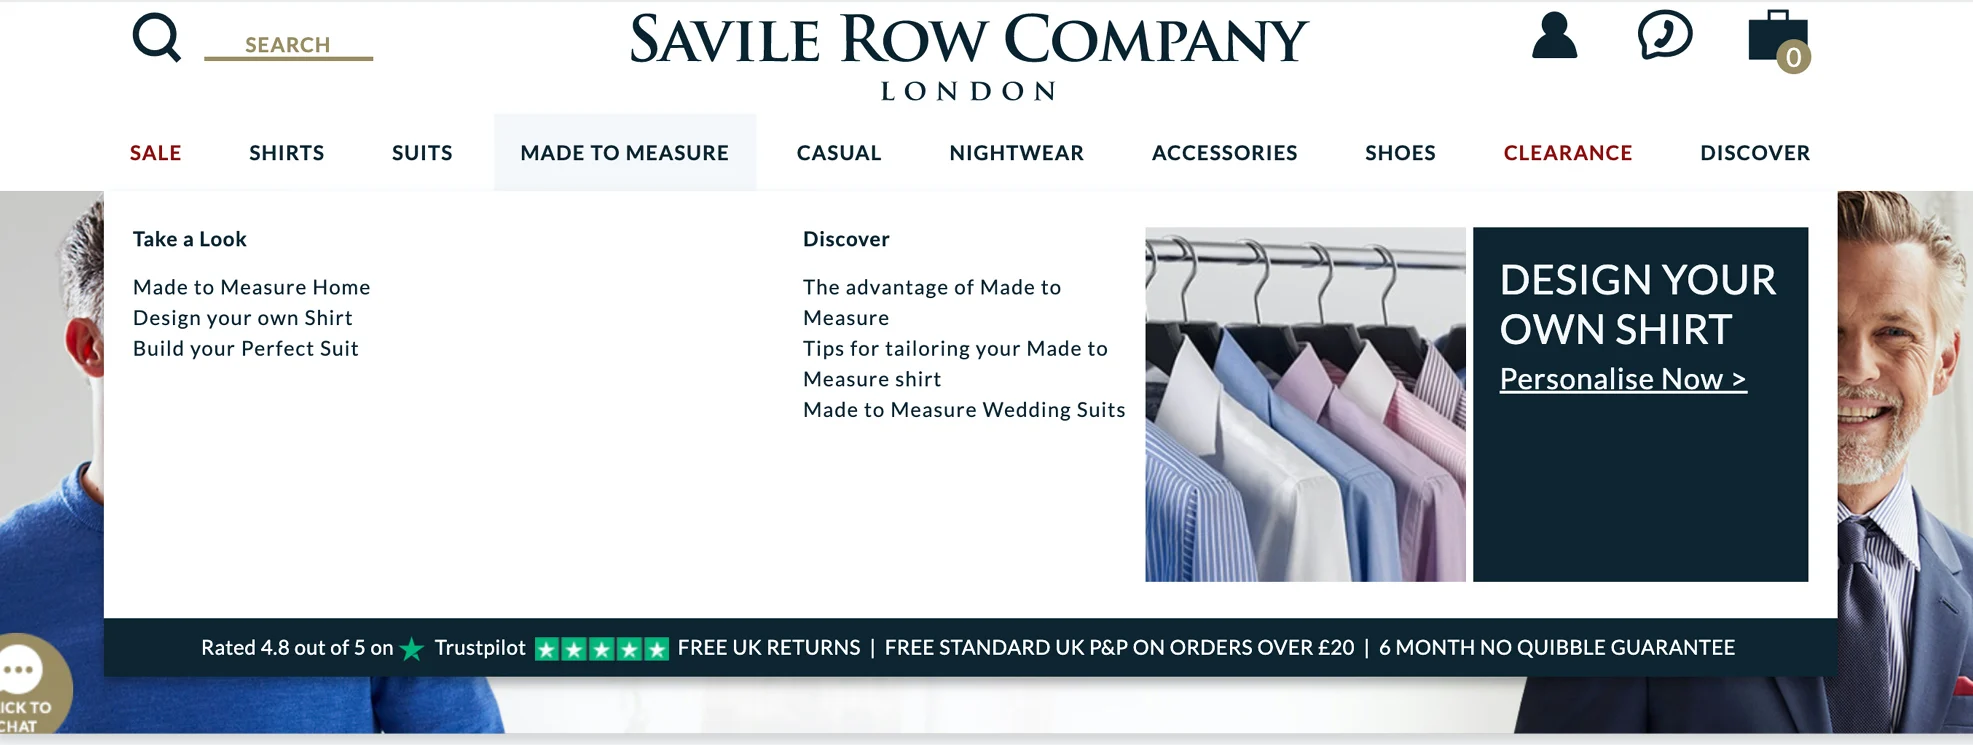 The Savile Row Company website, displaying the company's Trustpilot rating. This research shows that ratings and reviews, along with word of mouth, are the most trusted sources of information.